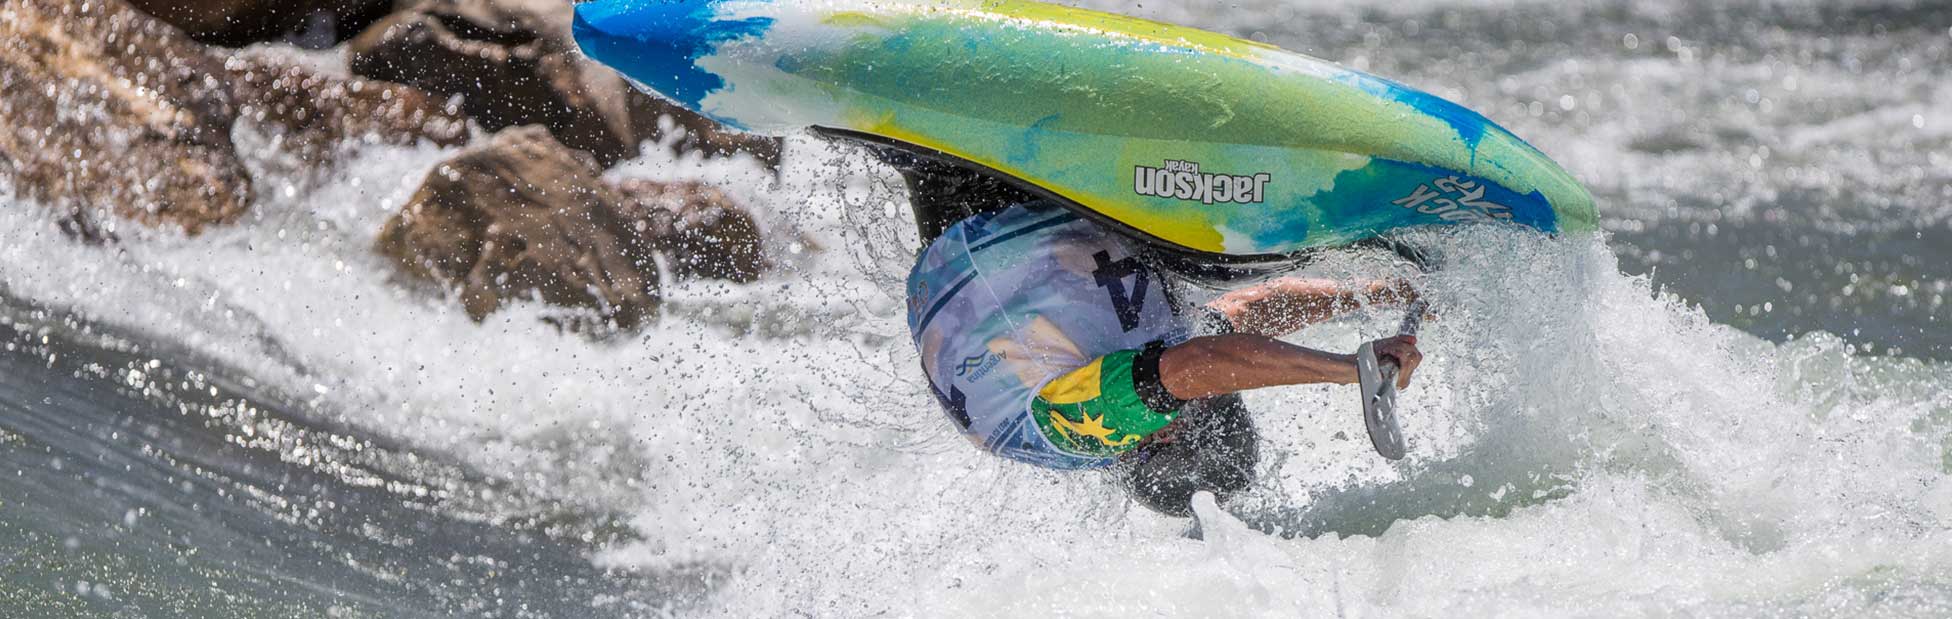 Male competitor in kayak mid somersault on the whitewater